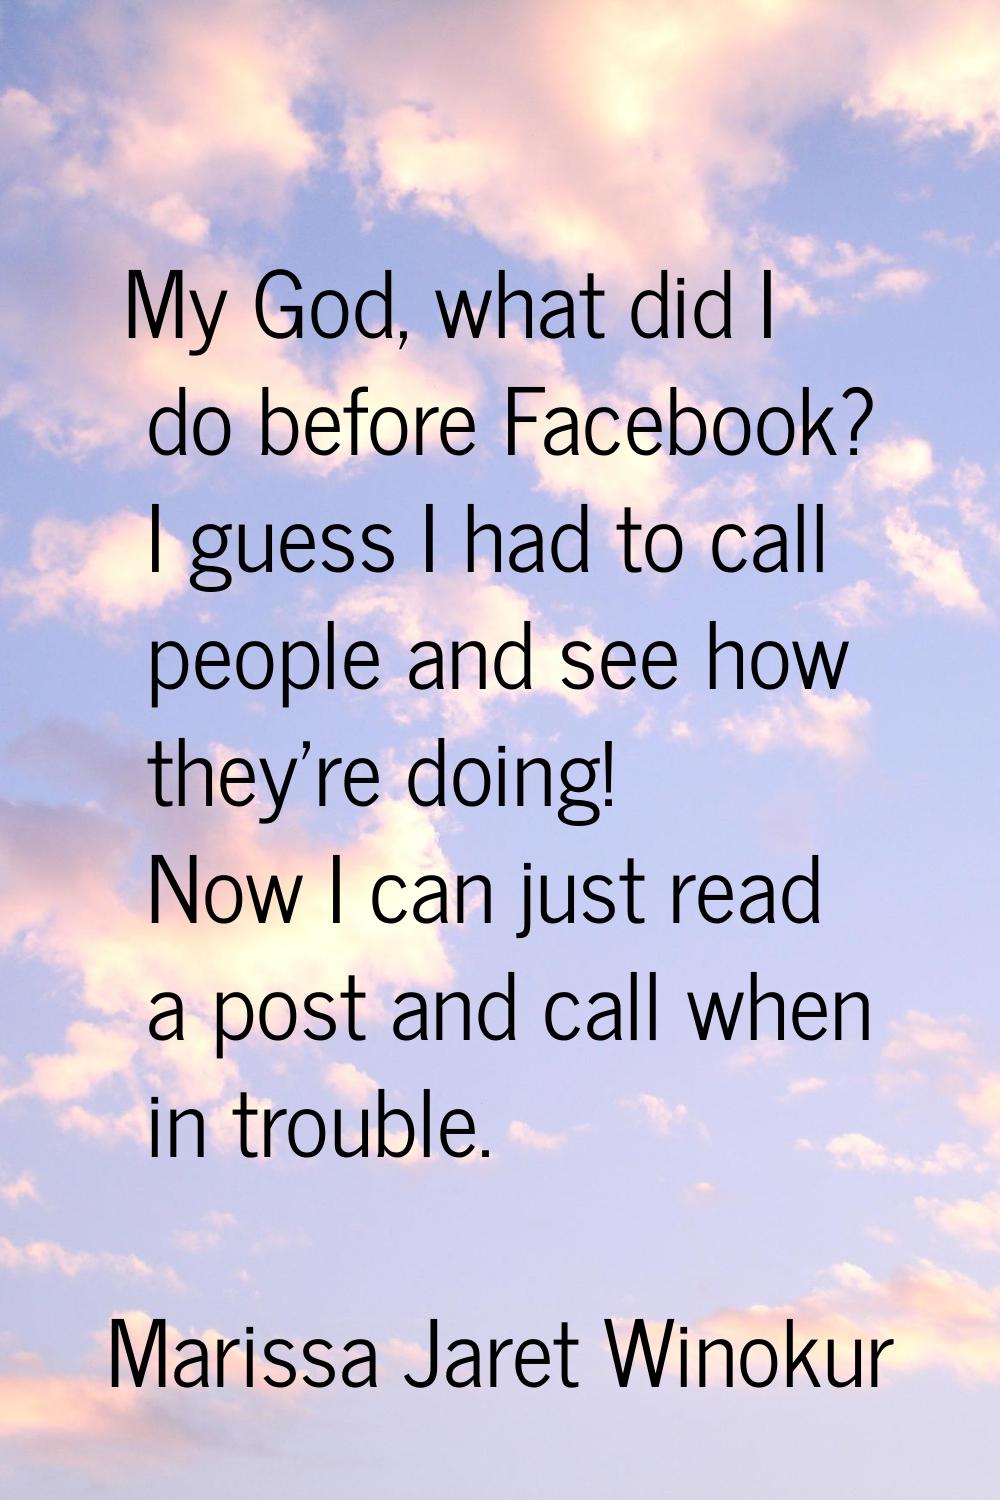 My God, what did I do before Facebook? I guess I had to call people and see how they're doing! Now 